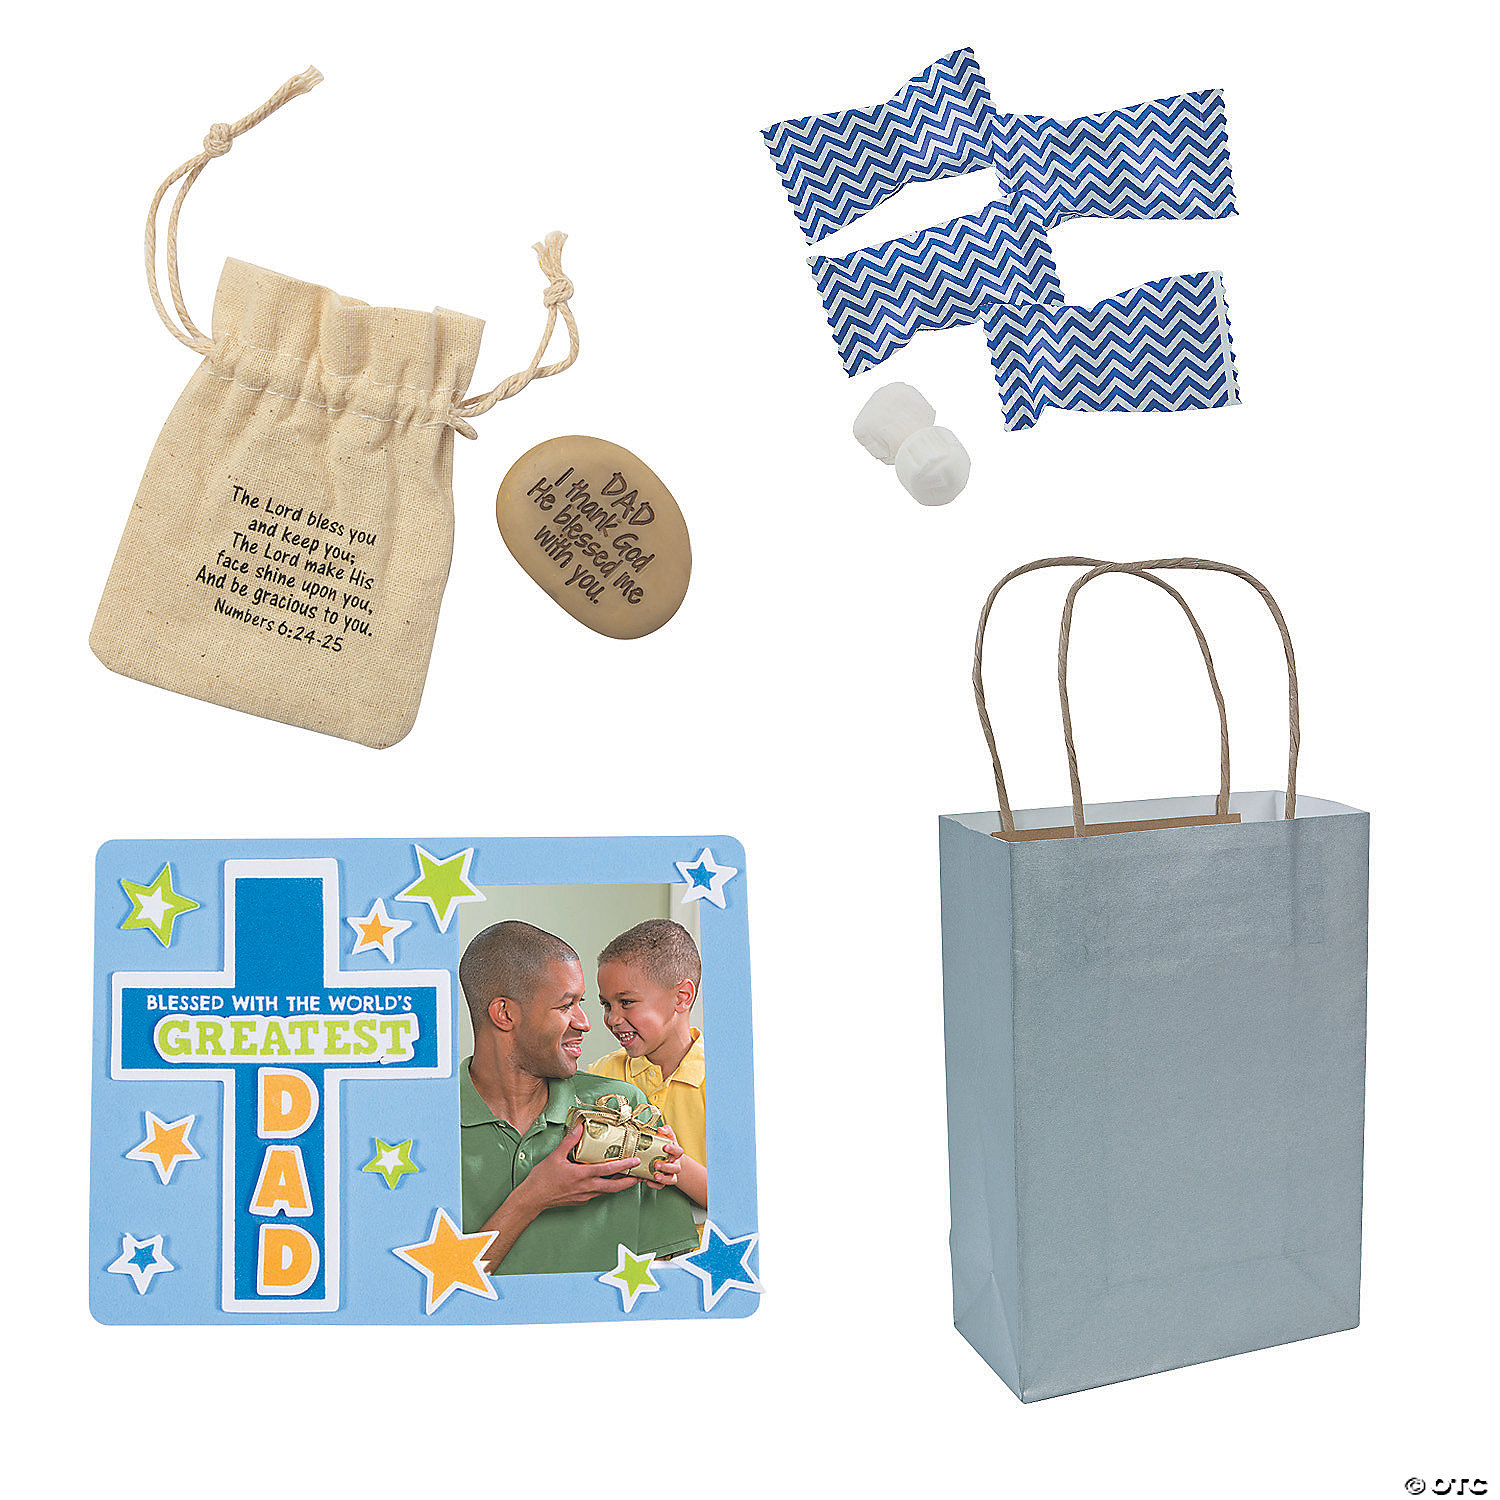 Blessed Day - Num 6:24 Small Gift Bag